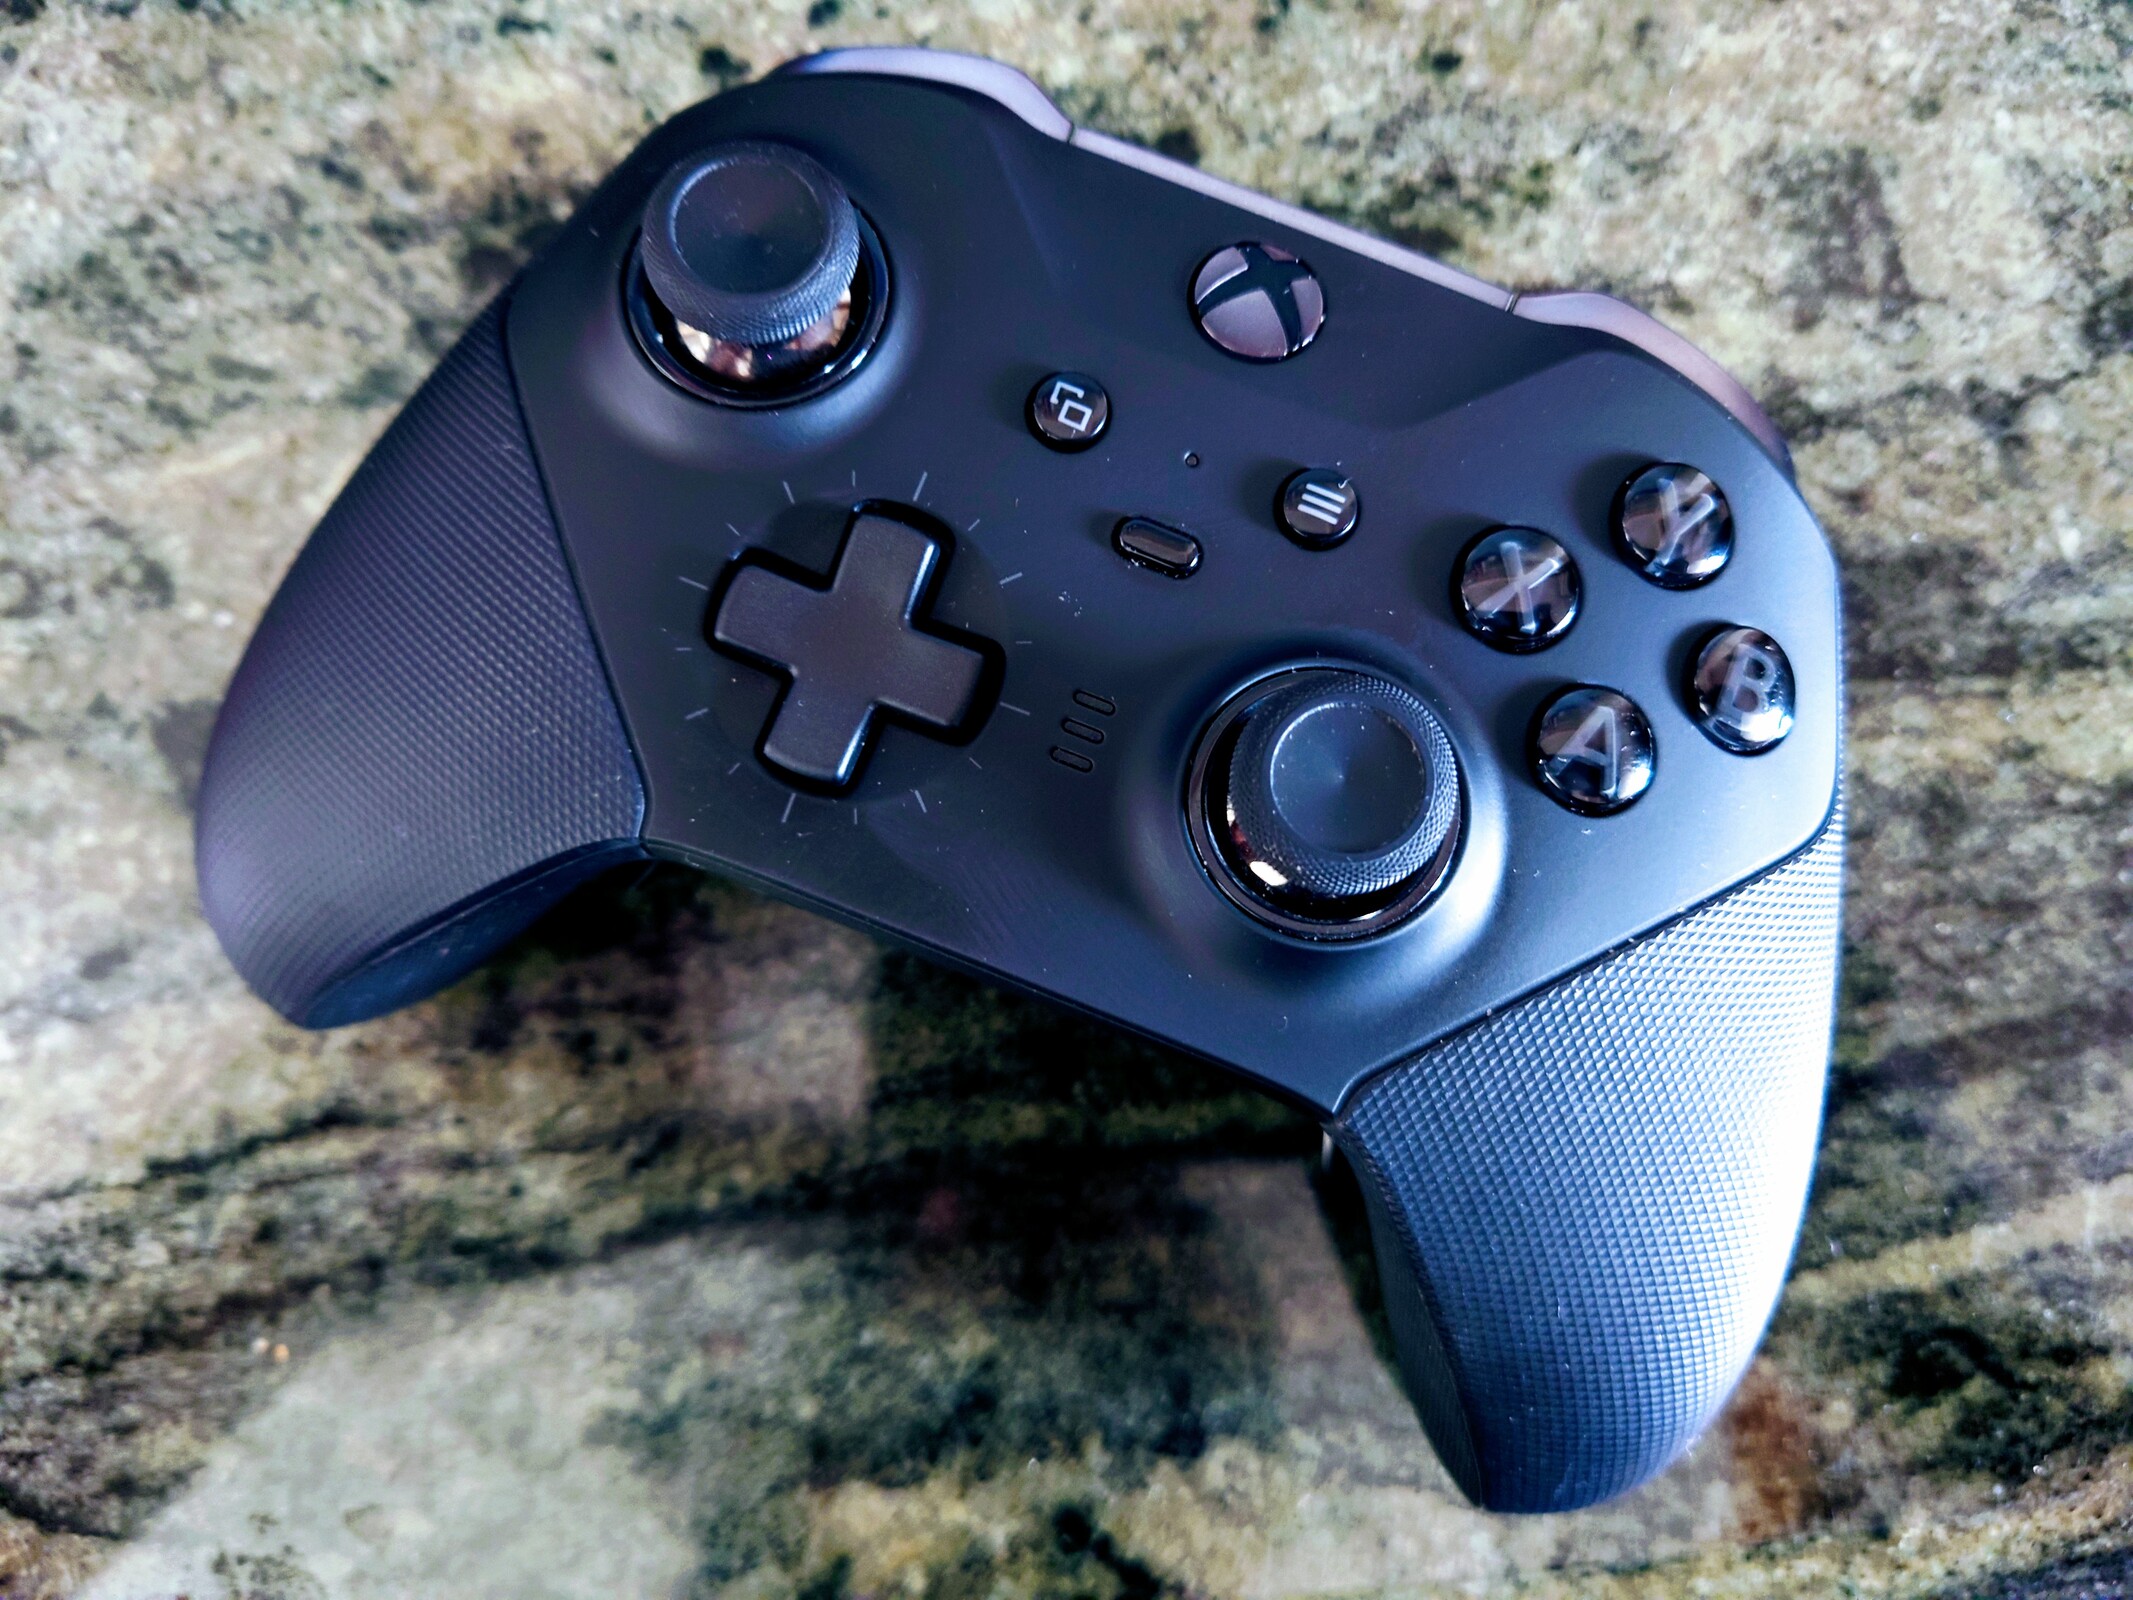 Xbox Elite Series 2 Core controller review: It's more of the same